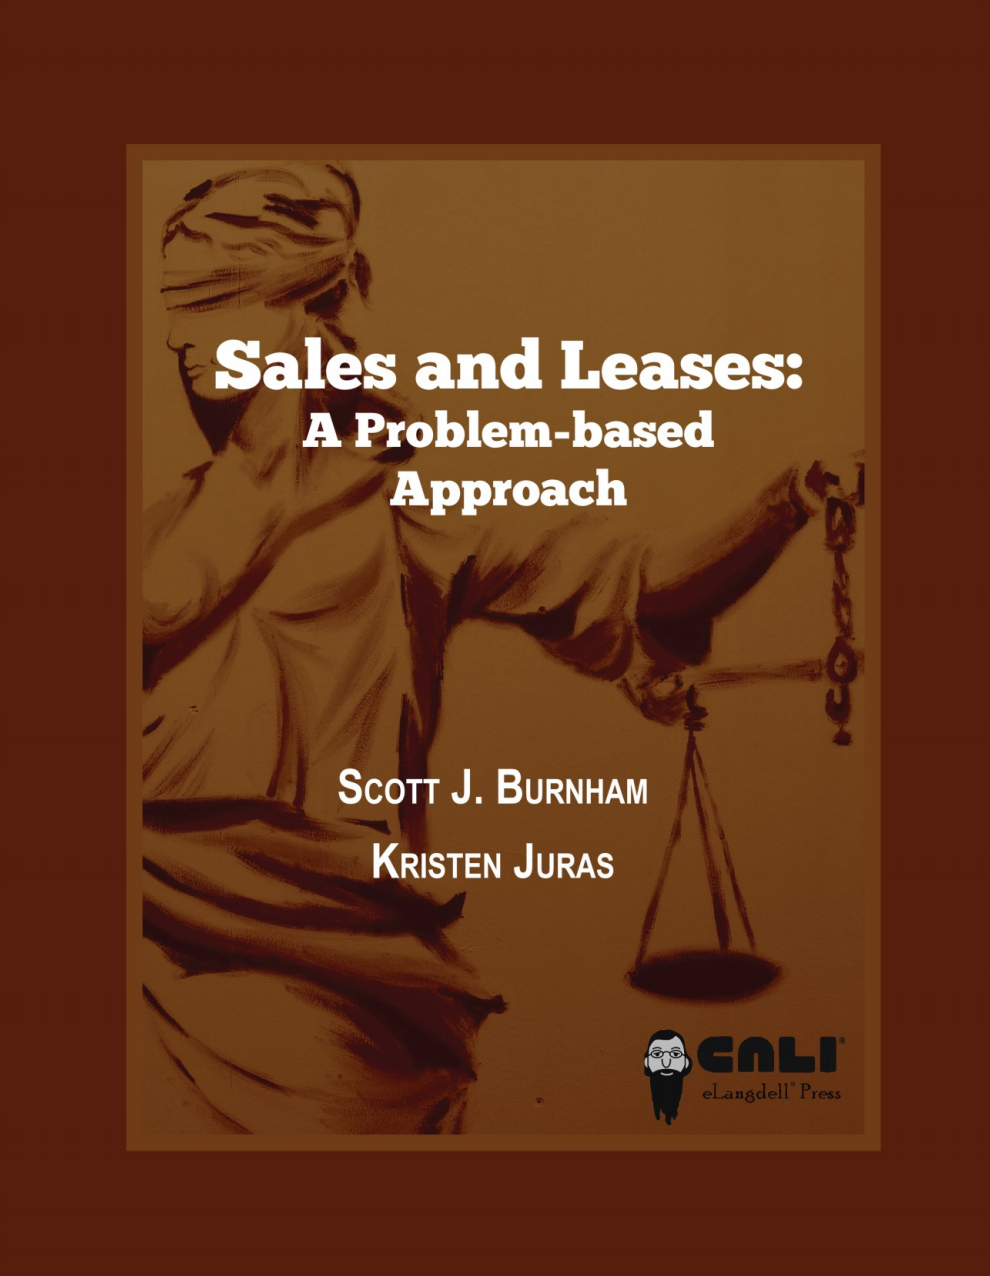 Read more about Sales and Leases: A Problem-based Approach